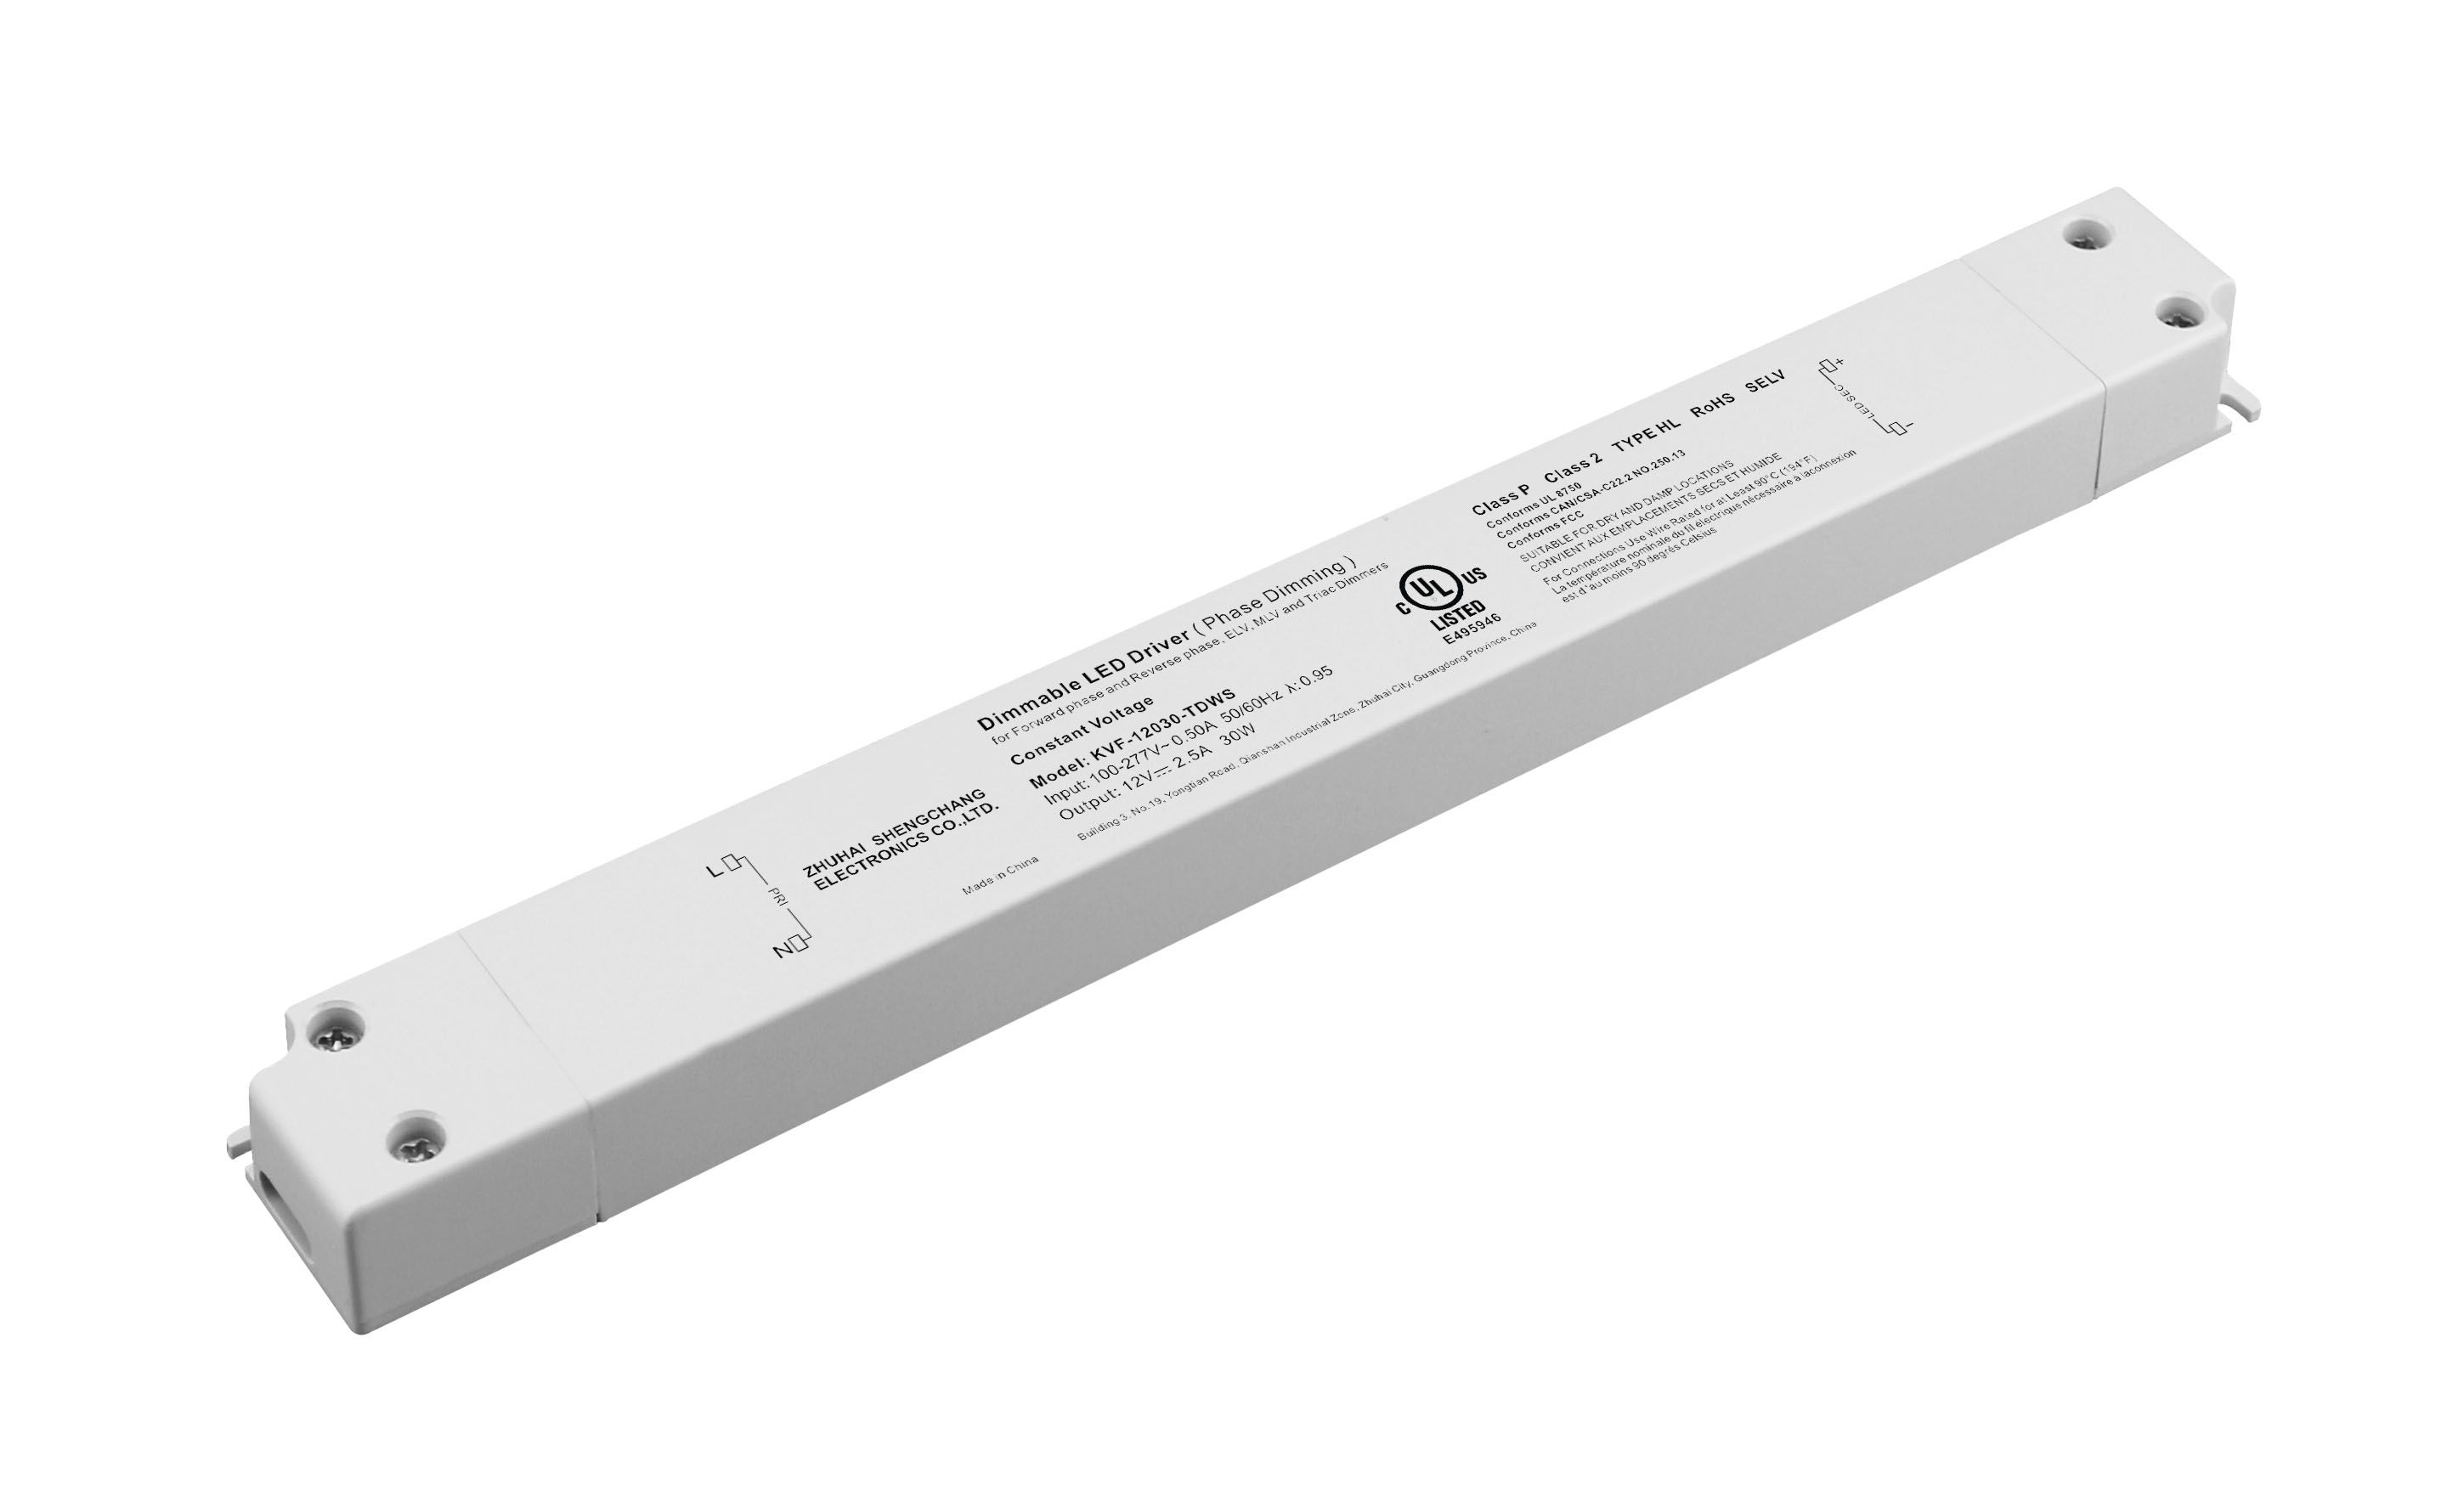 KVF-TDWS Series 30W Constant Voltage Triac Dimmable LED driver